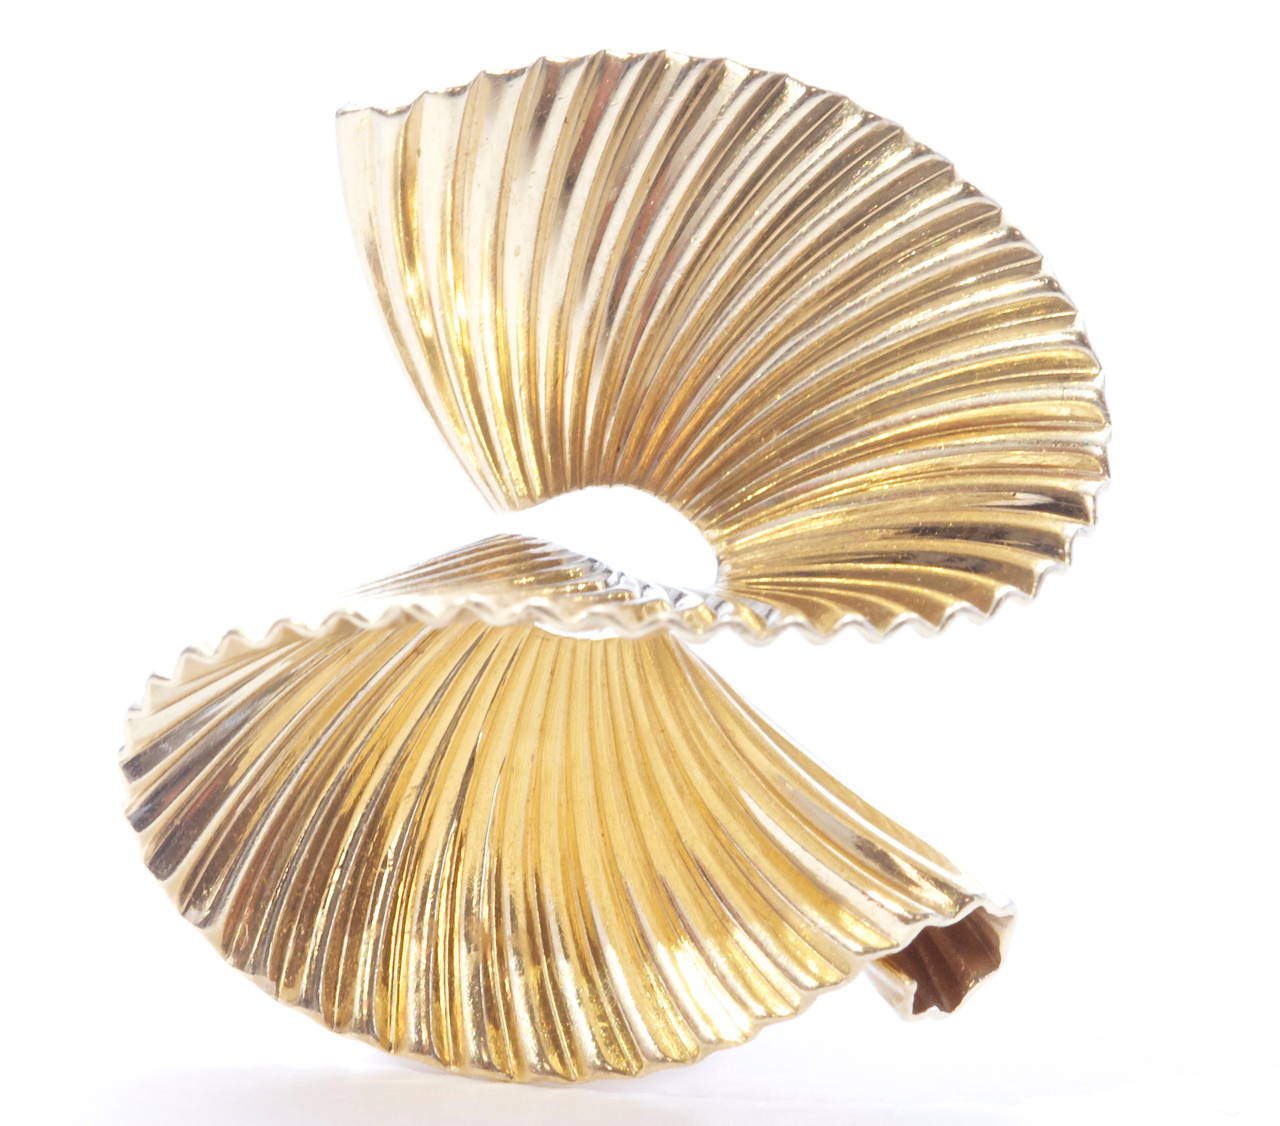 Elegant and swirling earrings created by Tiffany & Co. Crafted in 14k yellow gold.  

Circa 1960